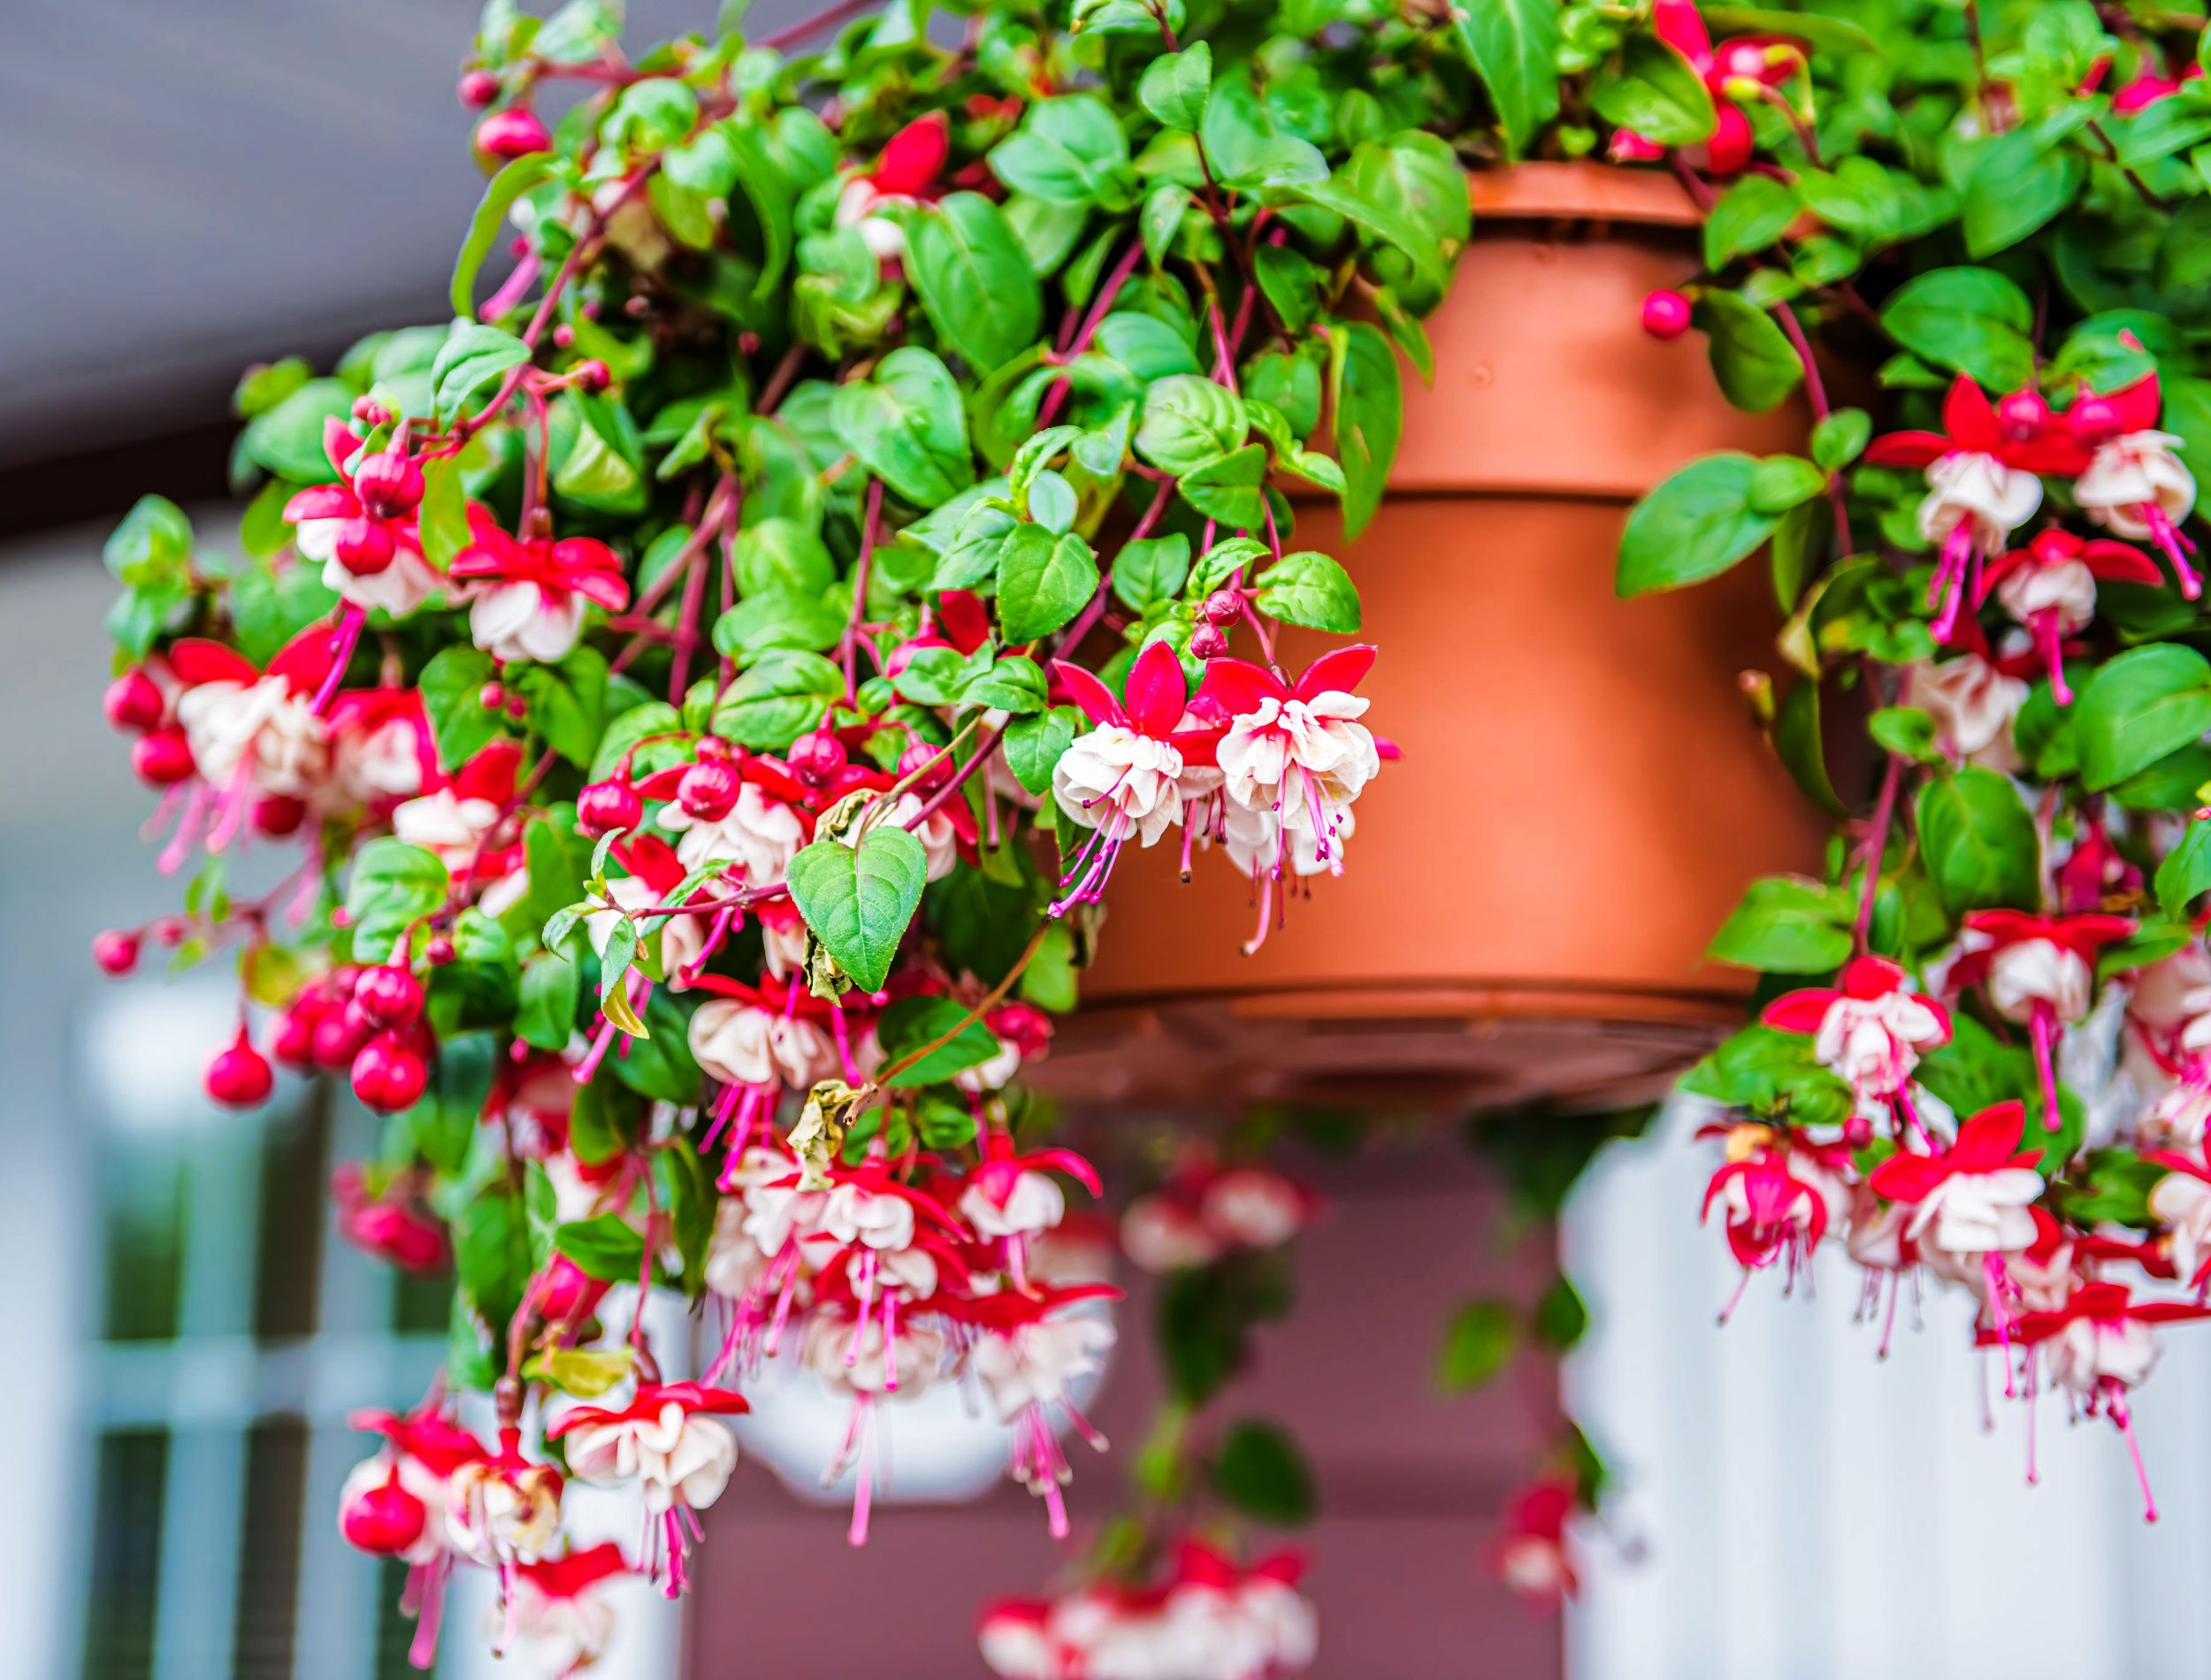 Closeup of hanging red and white fuchsia flowers potted plant basket at porch of home house building blurry background